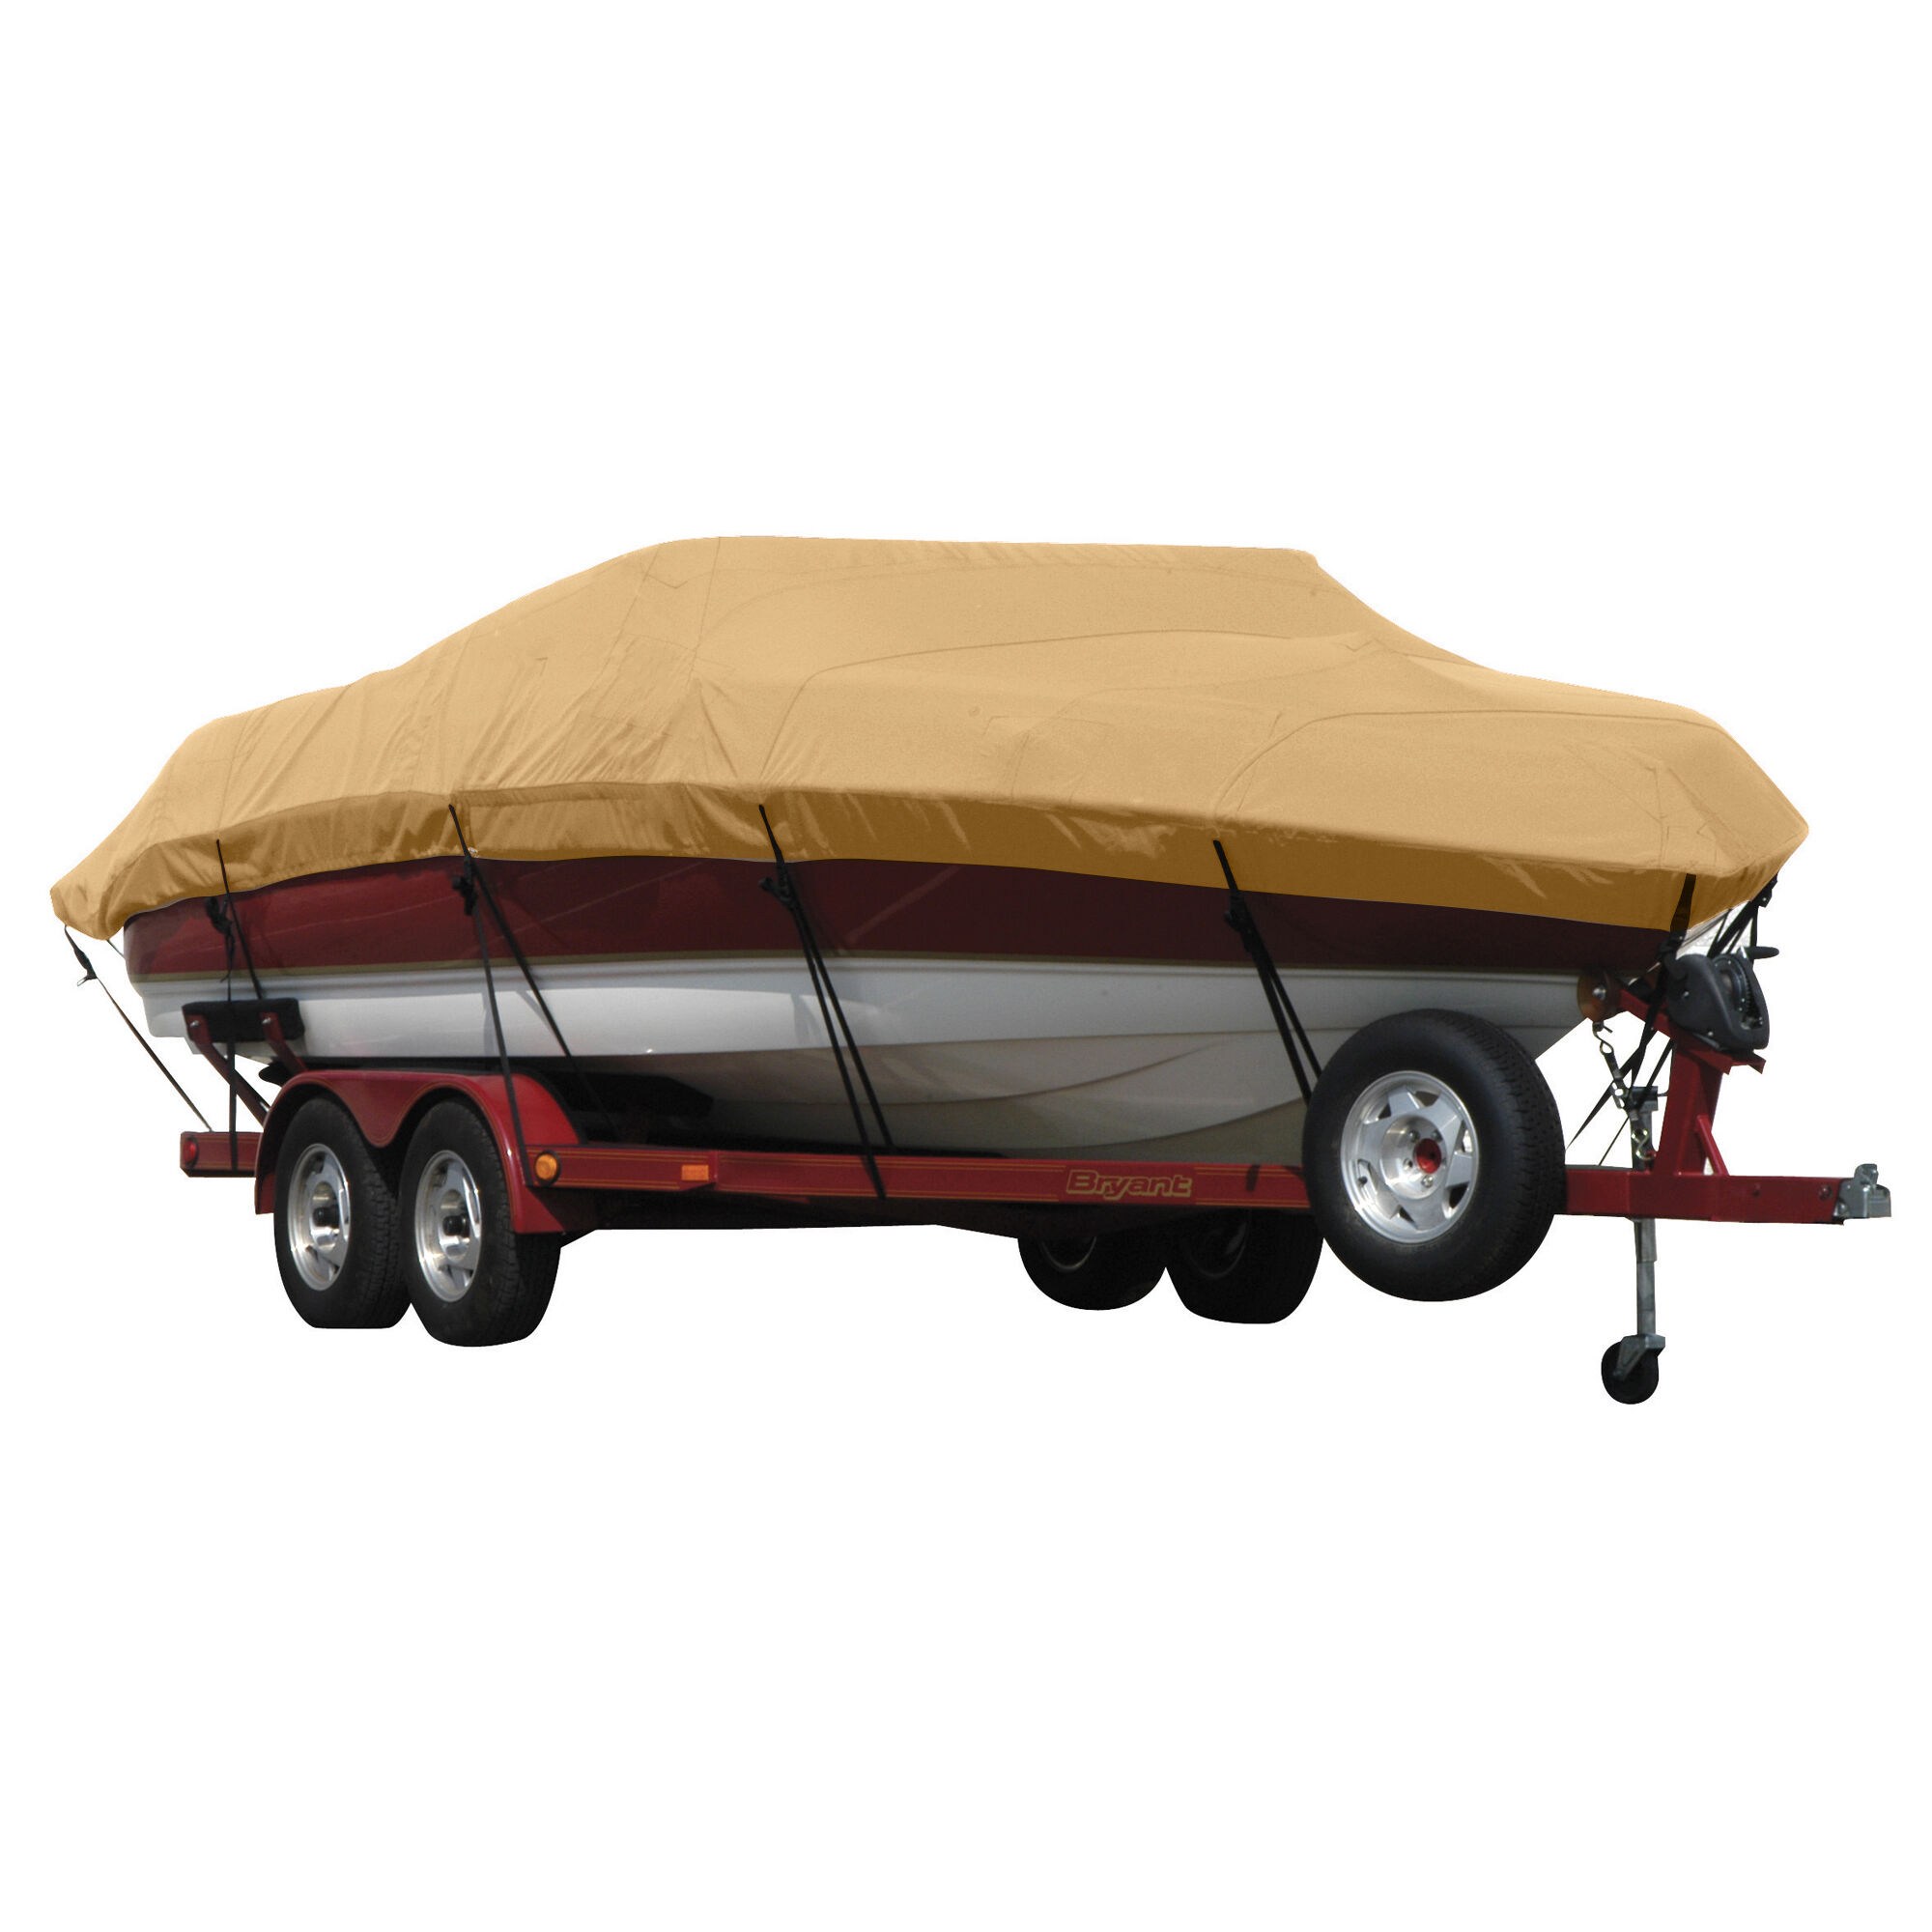 Covermate Exact Fit Sunbrella Boat Cover for Crownline 202 Lpx Sport 202 Lpx Sport Bowrider Does Not Cover PLATFORMm I/O. Toast